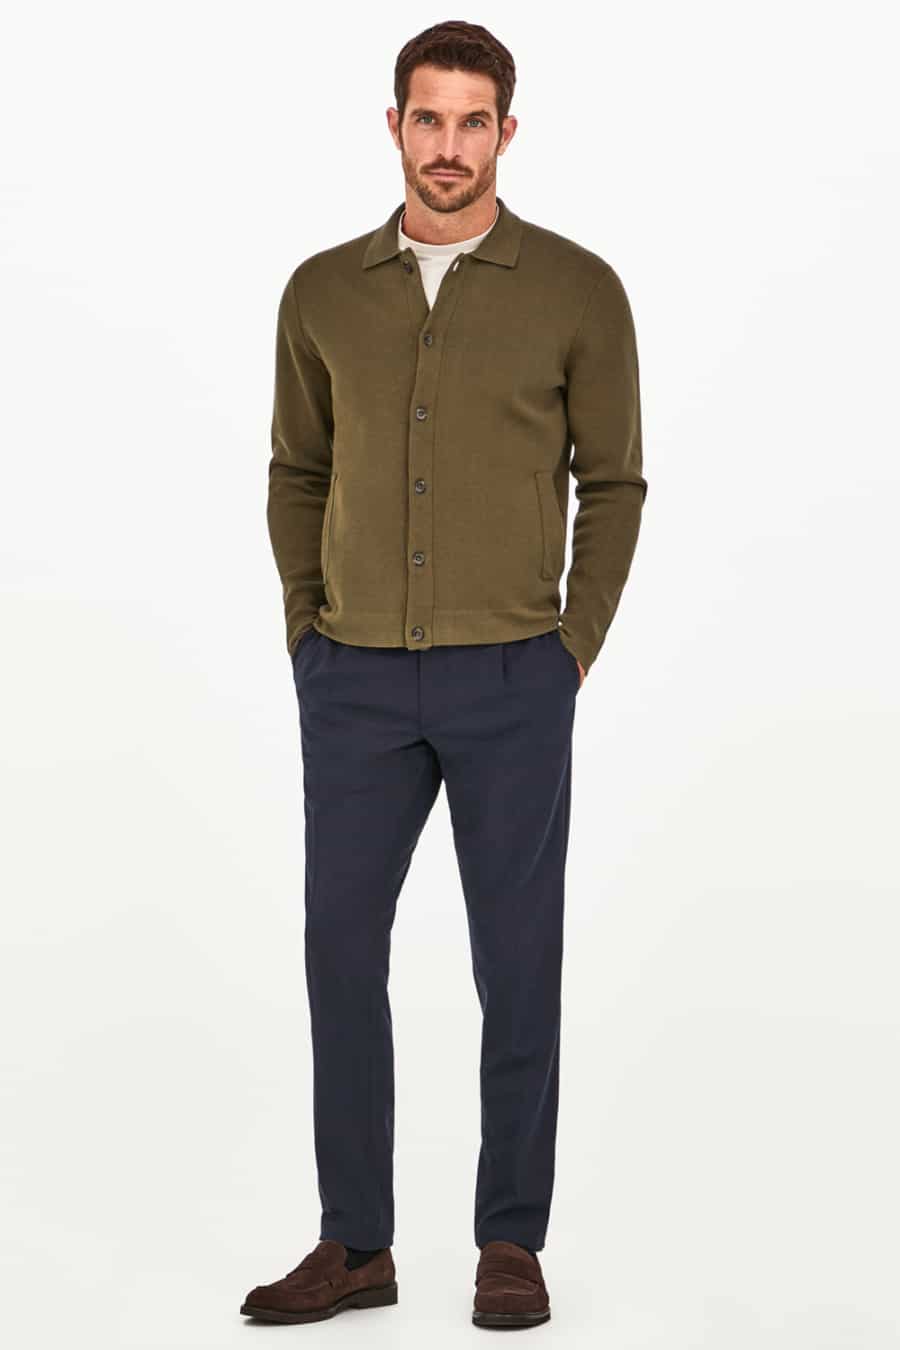 Men's navy chinos, white T-shirt, green collared cardigan and brown suede loafers outfit